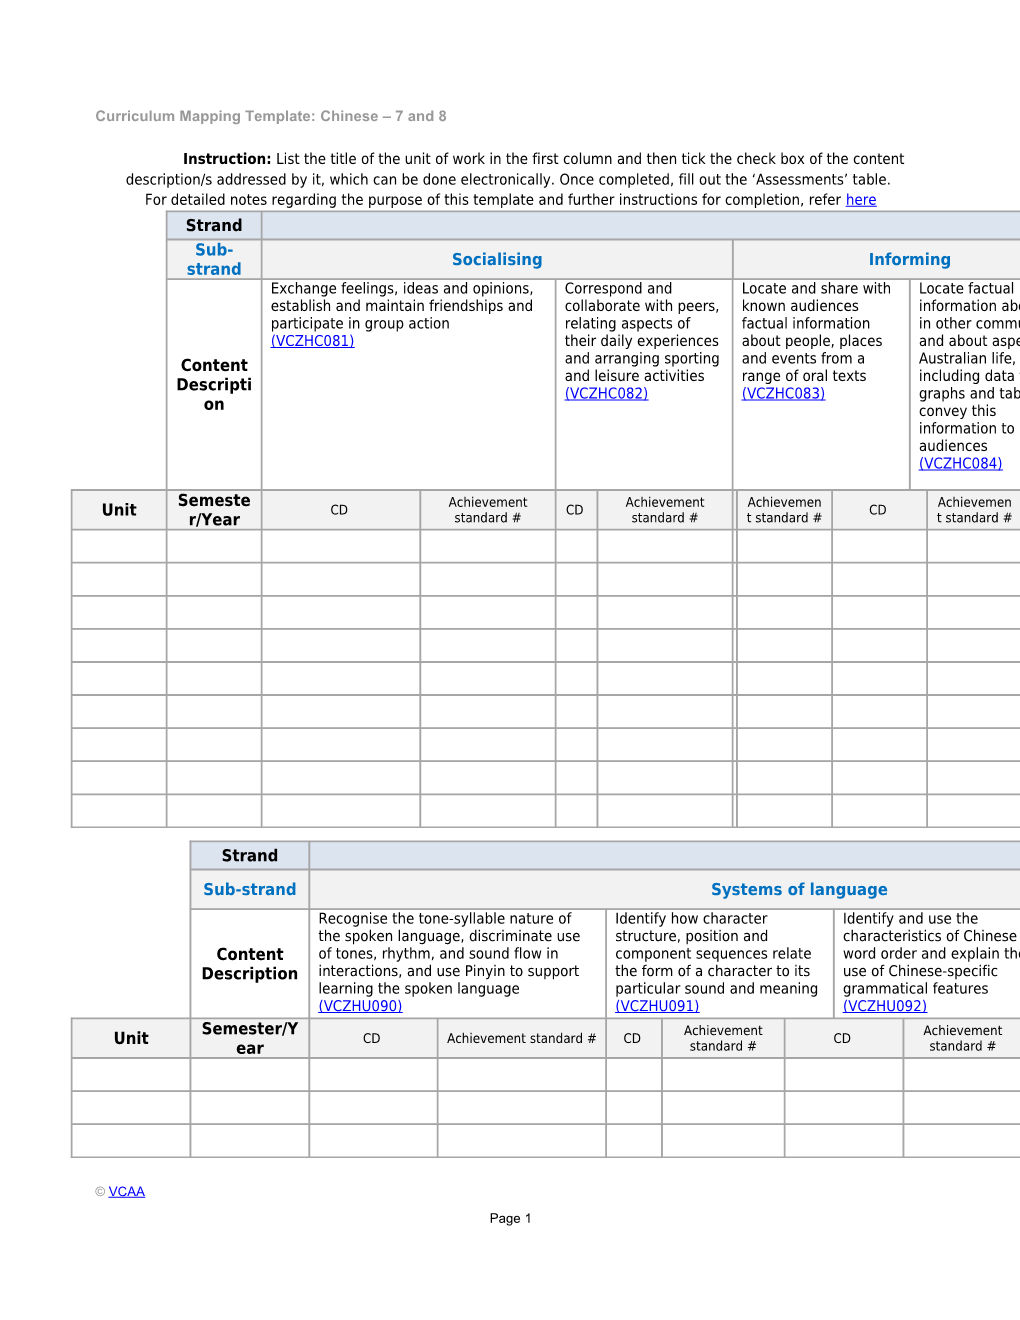 Curriculum Mapping Template: Chinese 7 and 8